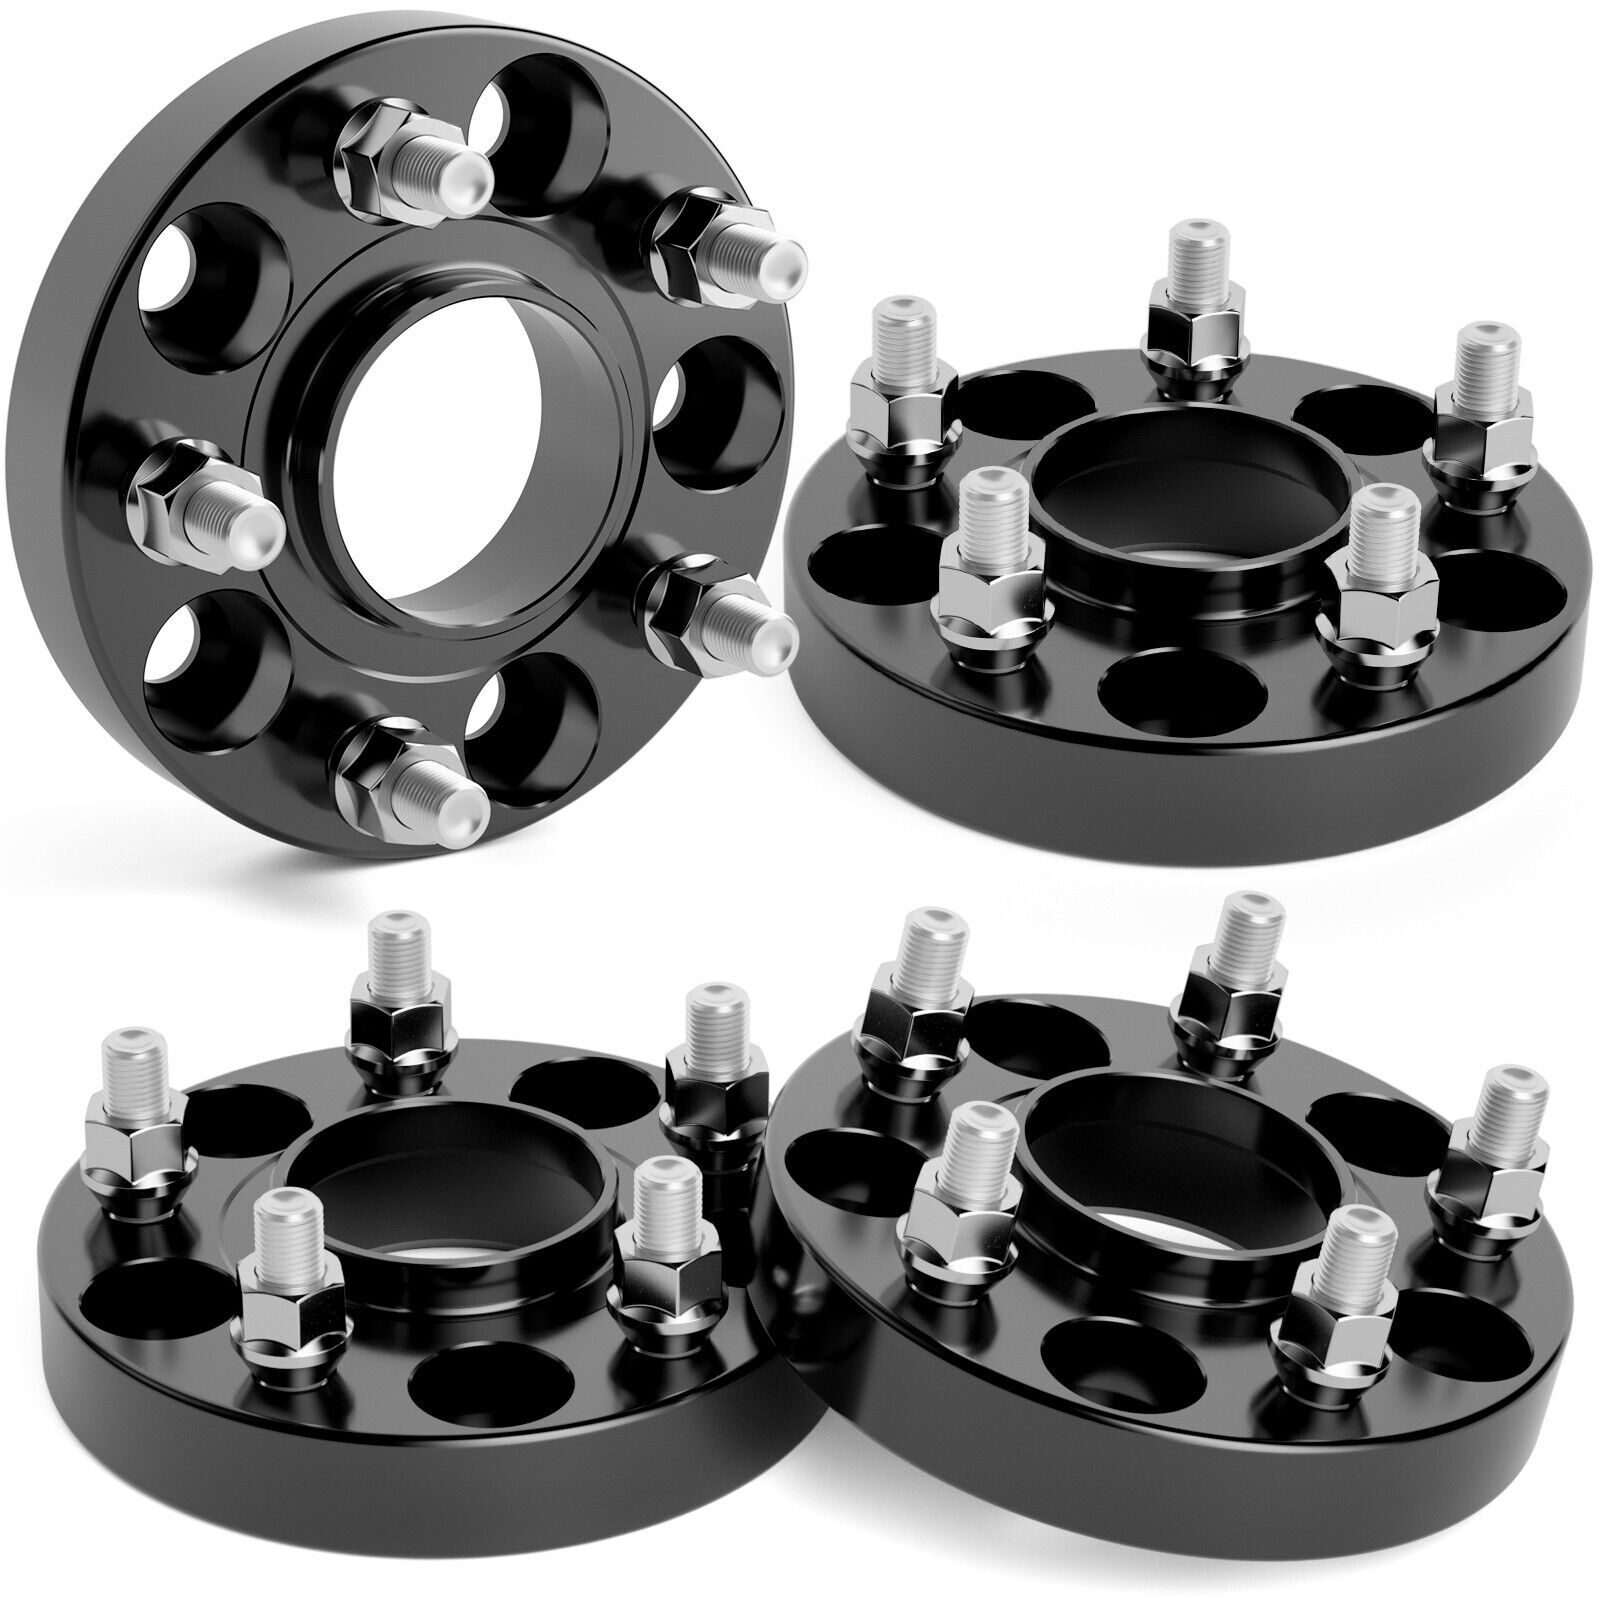 4PC 25mm 5x4.5 5x114.3 Wheel Spacers Hubcentric for Civic CRV XRV Accord TLX TSX